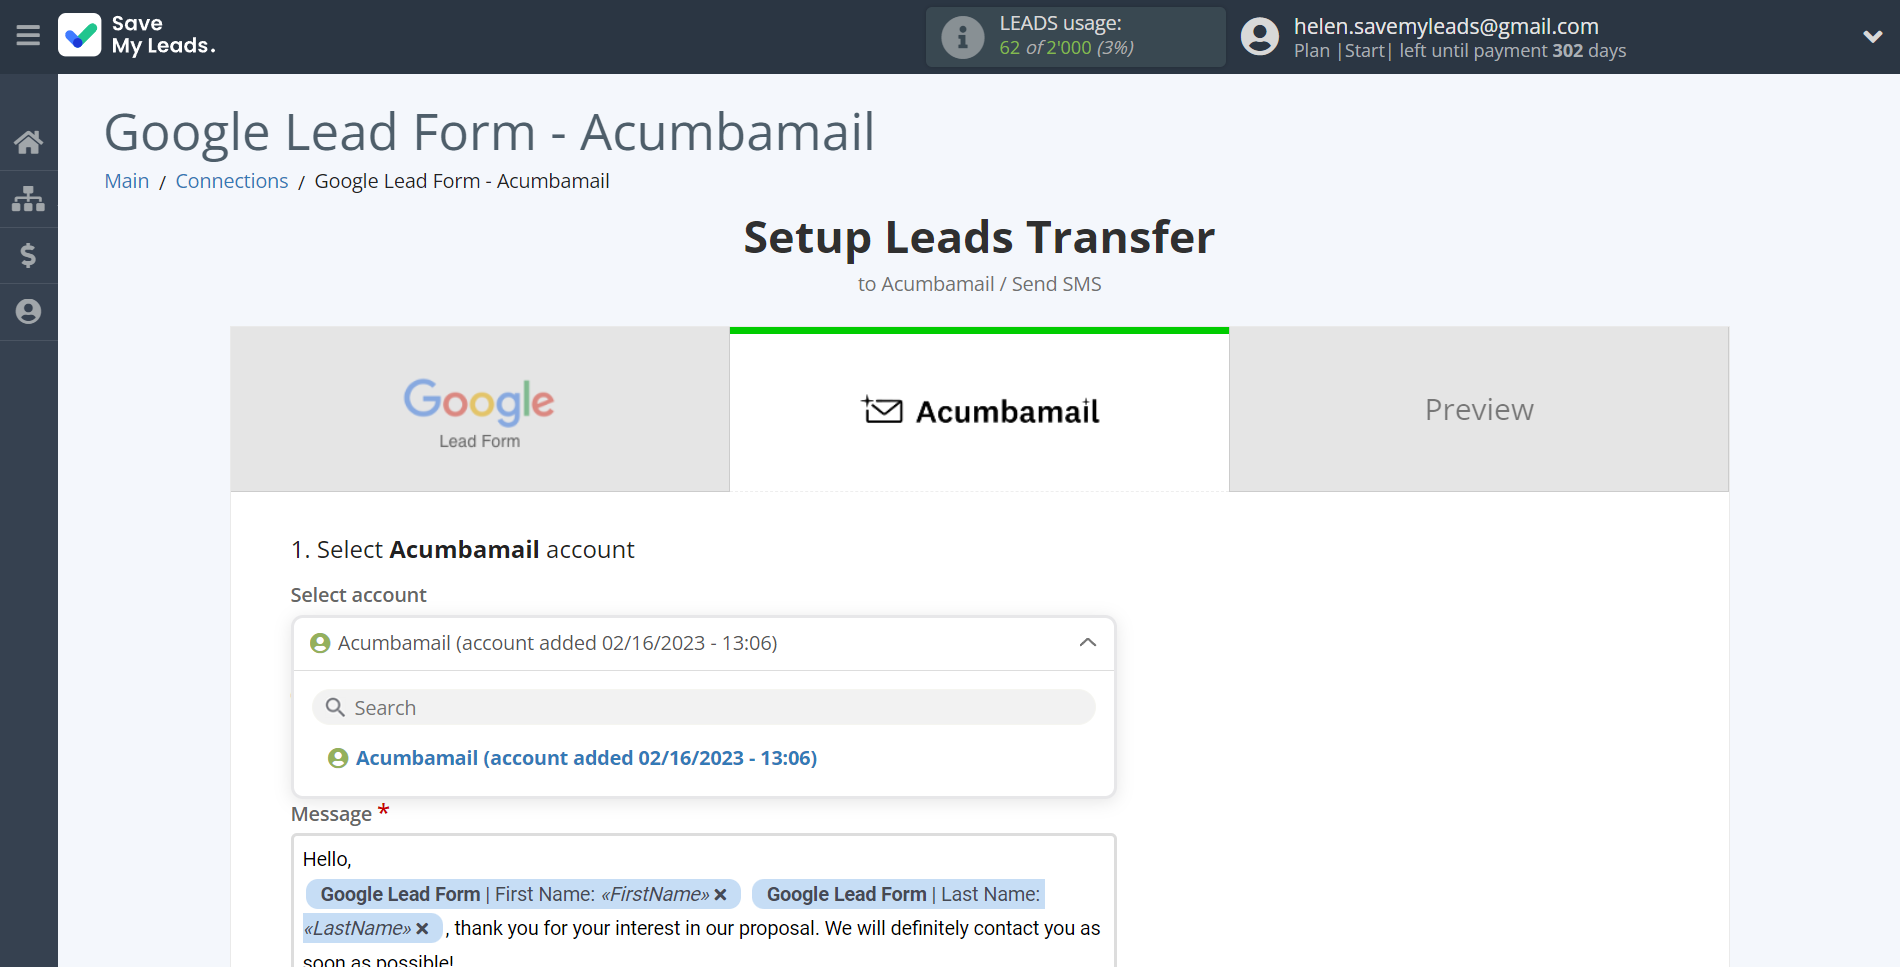 How to Connect Google Lead Form with Acumbamail Send SMS | Data Destination account selection